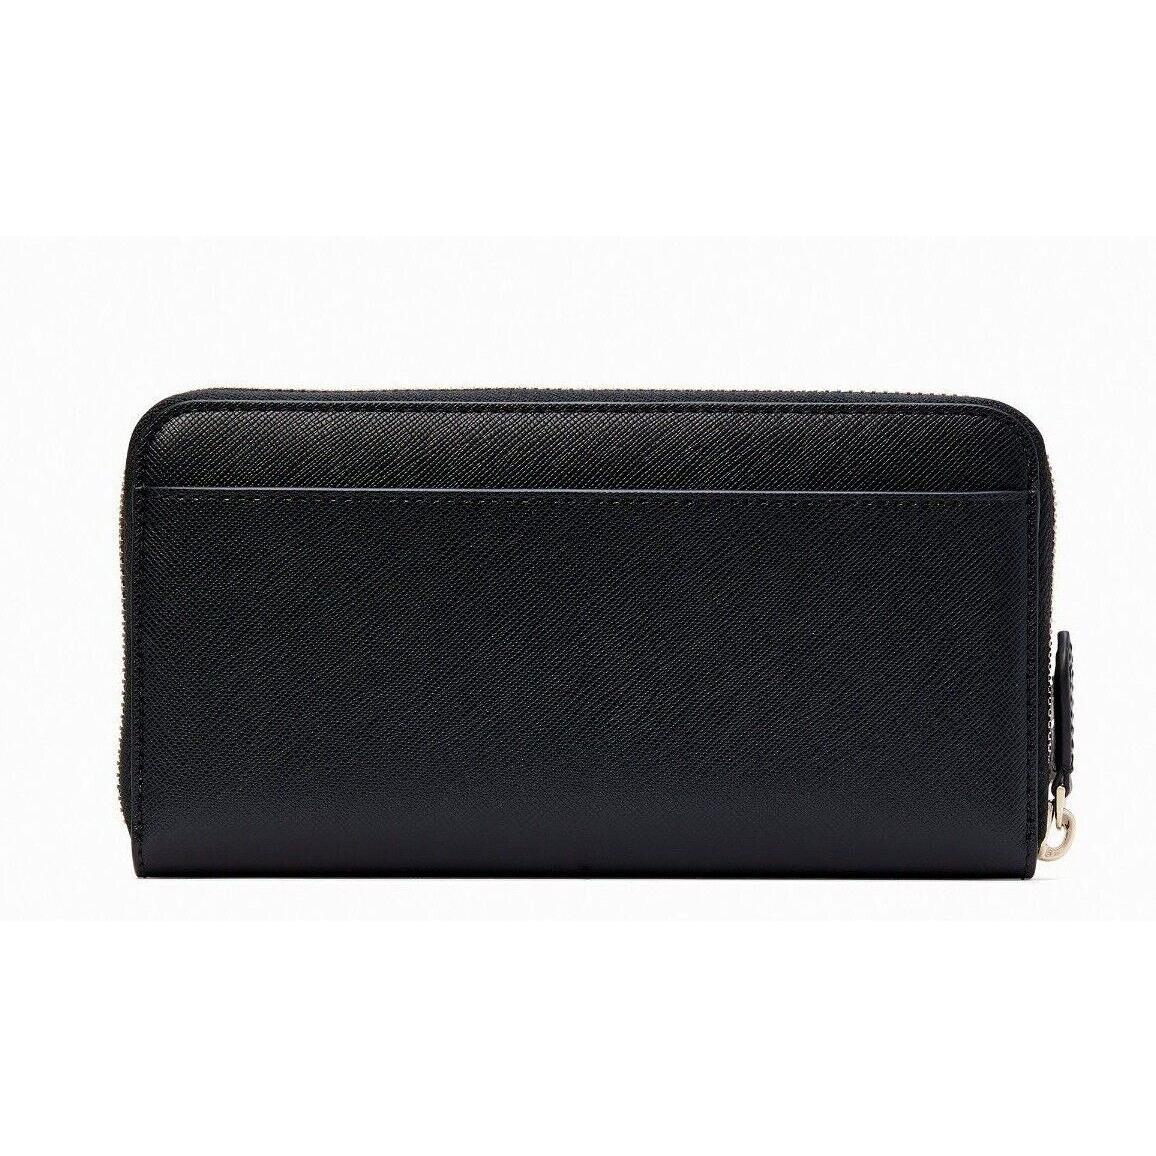 New Kate Spade Marlee Large Continental Wallet Saffiano Pvc Black